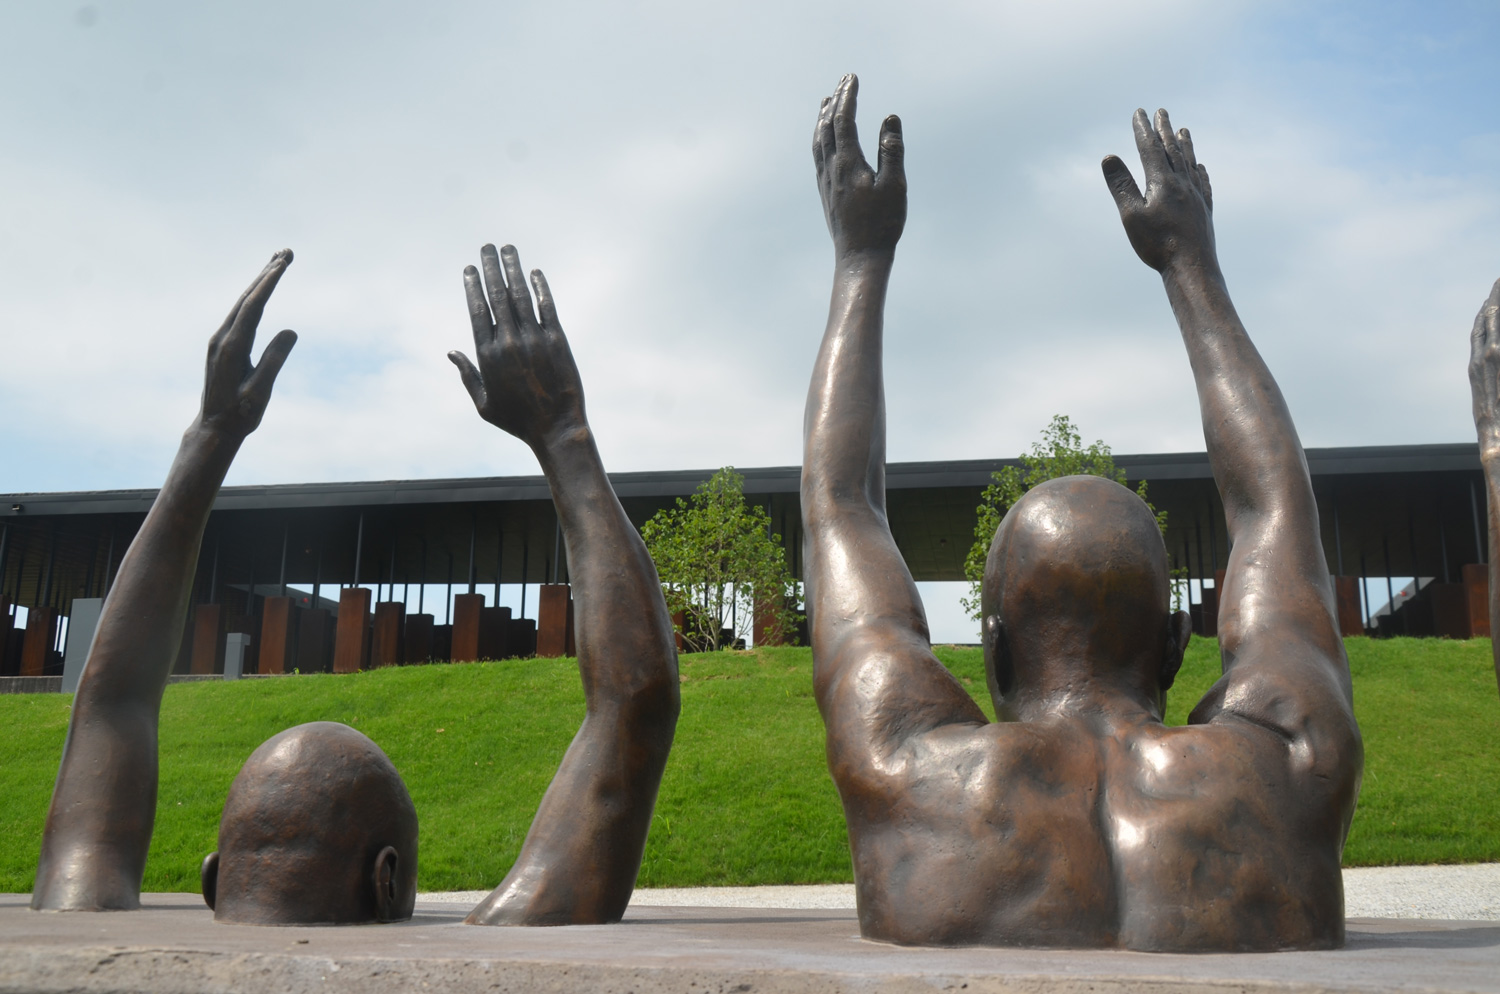 Detail from Hank Willis Thomas's 'Raise Up,' a sculpture reflecting the bias of the criminal justice system against blacks, at the newly opened National Memorial for Peace and Justice in Montgomery, Ala. Click on the image for larger view. (c Pierre Tristam / FlaglerLive)